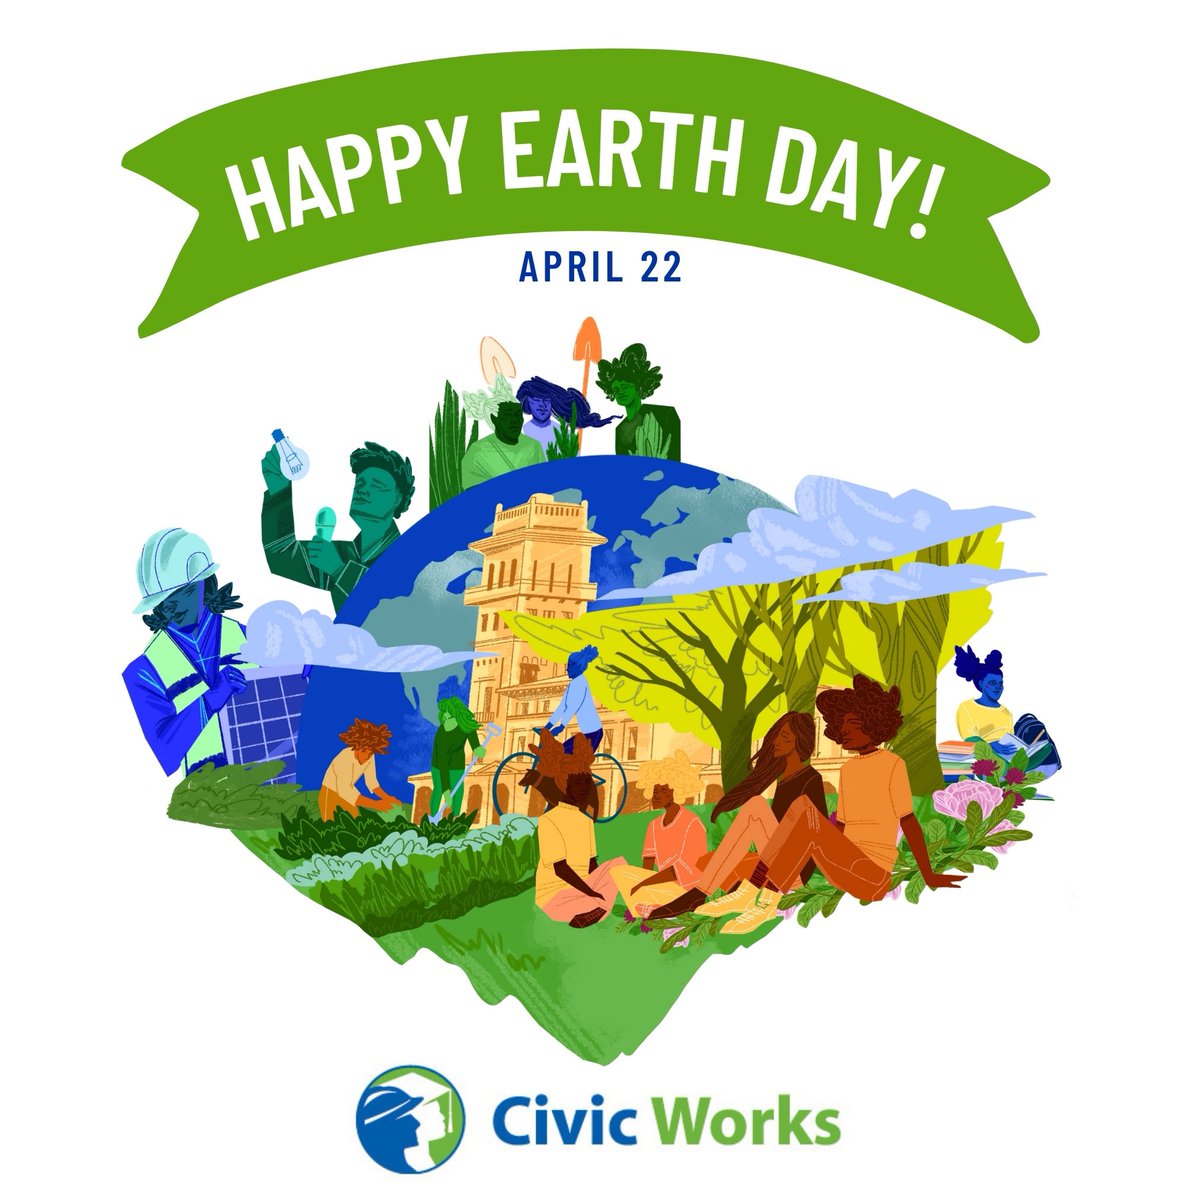 Happy Earth Day from all of us at Civic Works! 🌎🎉 Find out how you can wield the power to celebrate, nurture, and uplift our planet today and every day. Learn more about ways you can honor Earth Day at our Linktree below! 🌱 linktr.ee/civicworks